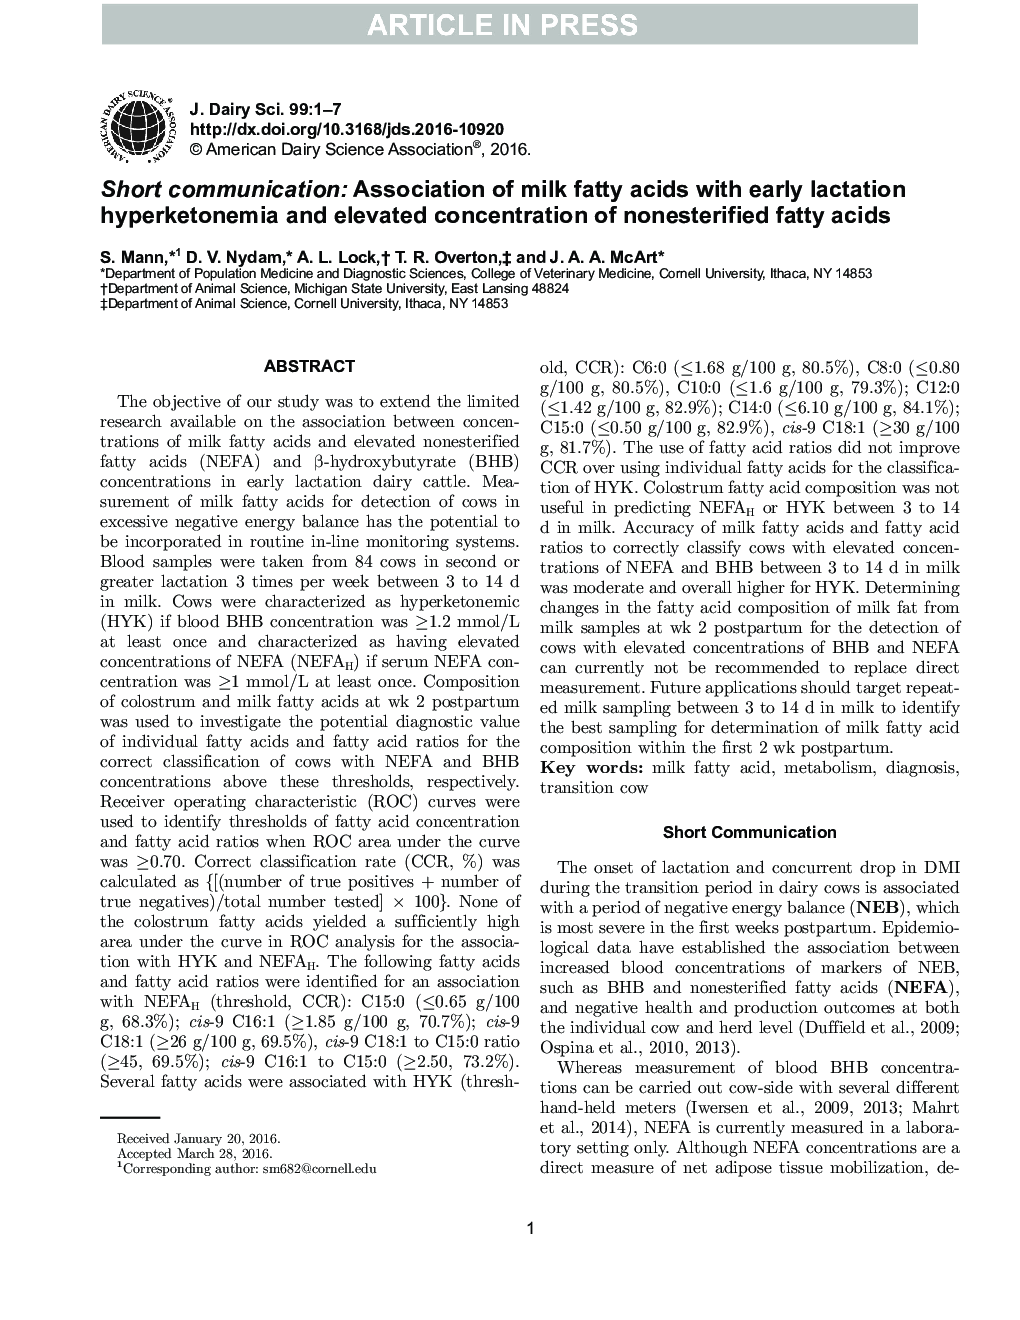 Short communication: Association of milk fatty acids with early lactation hyperketonemia and elevated concentration of nonesterified fatty acids